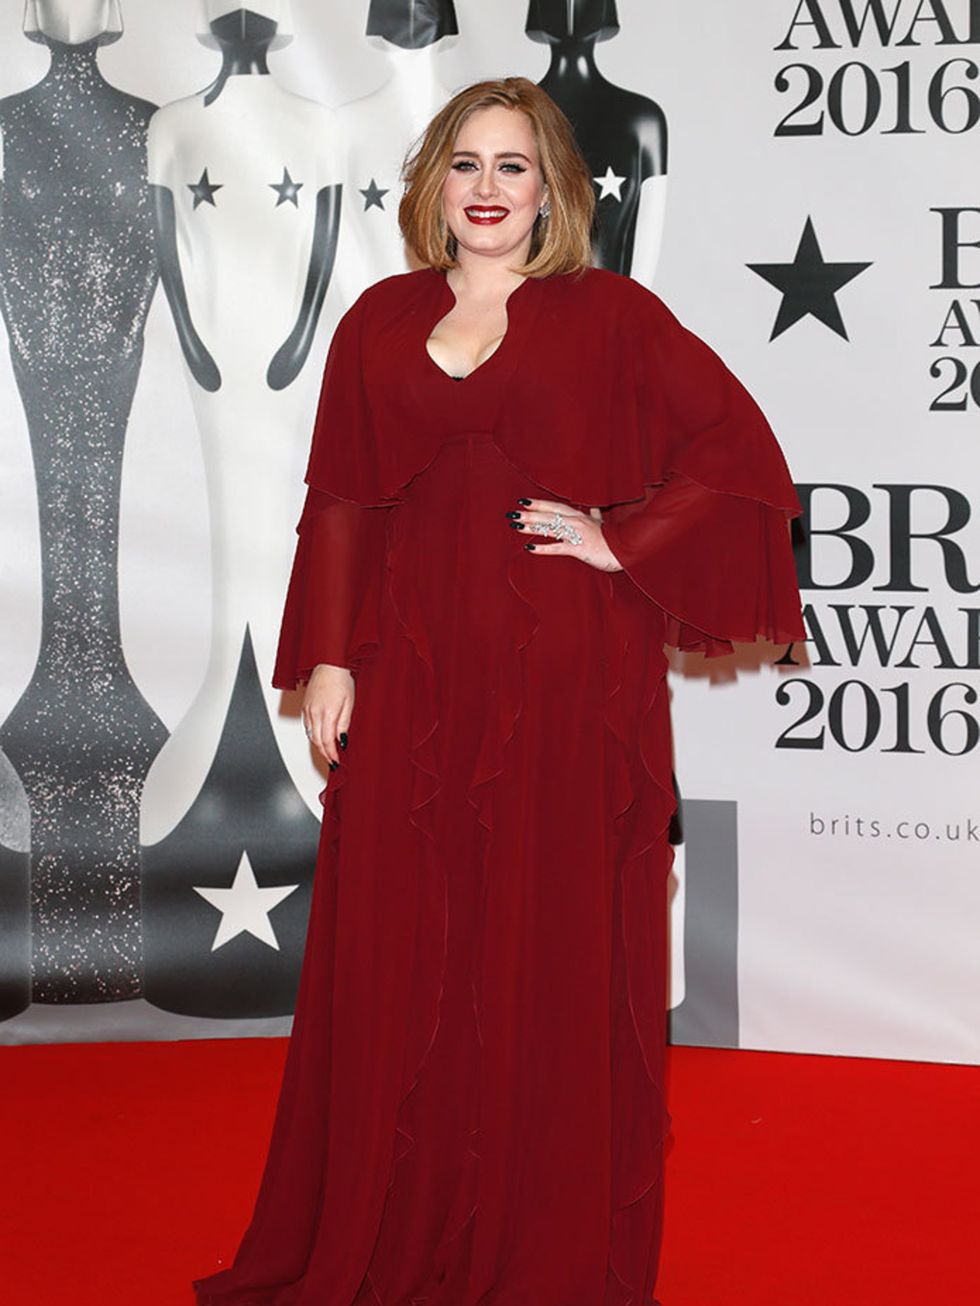 Adele at the BRIT Awards in London, February 2016.